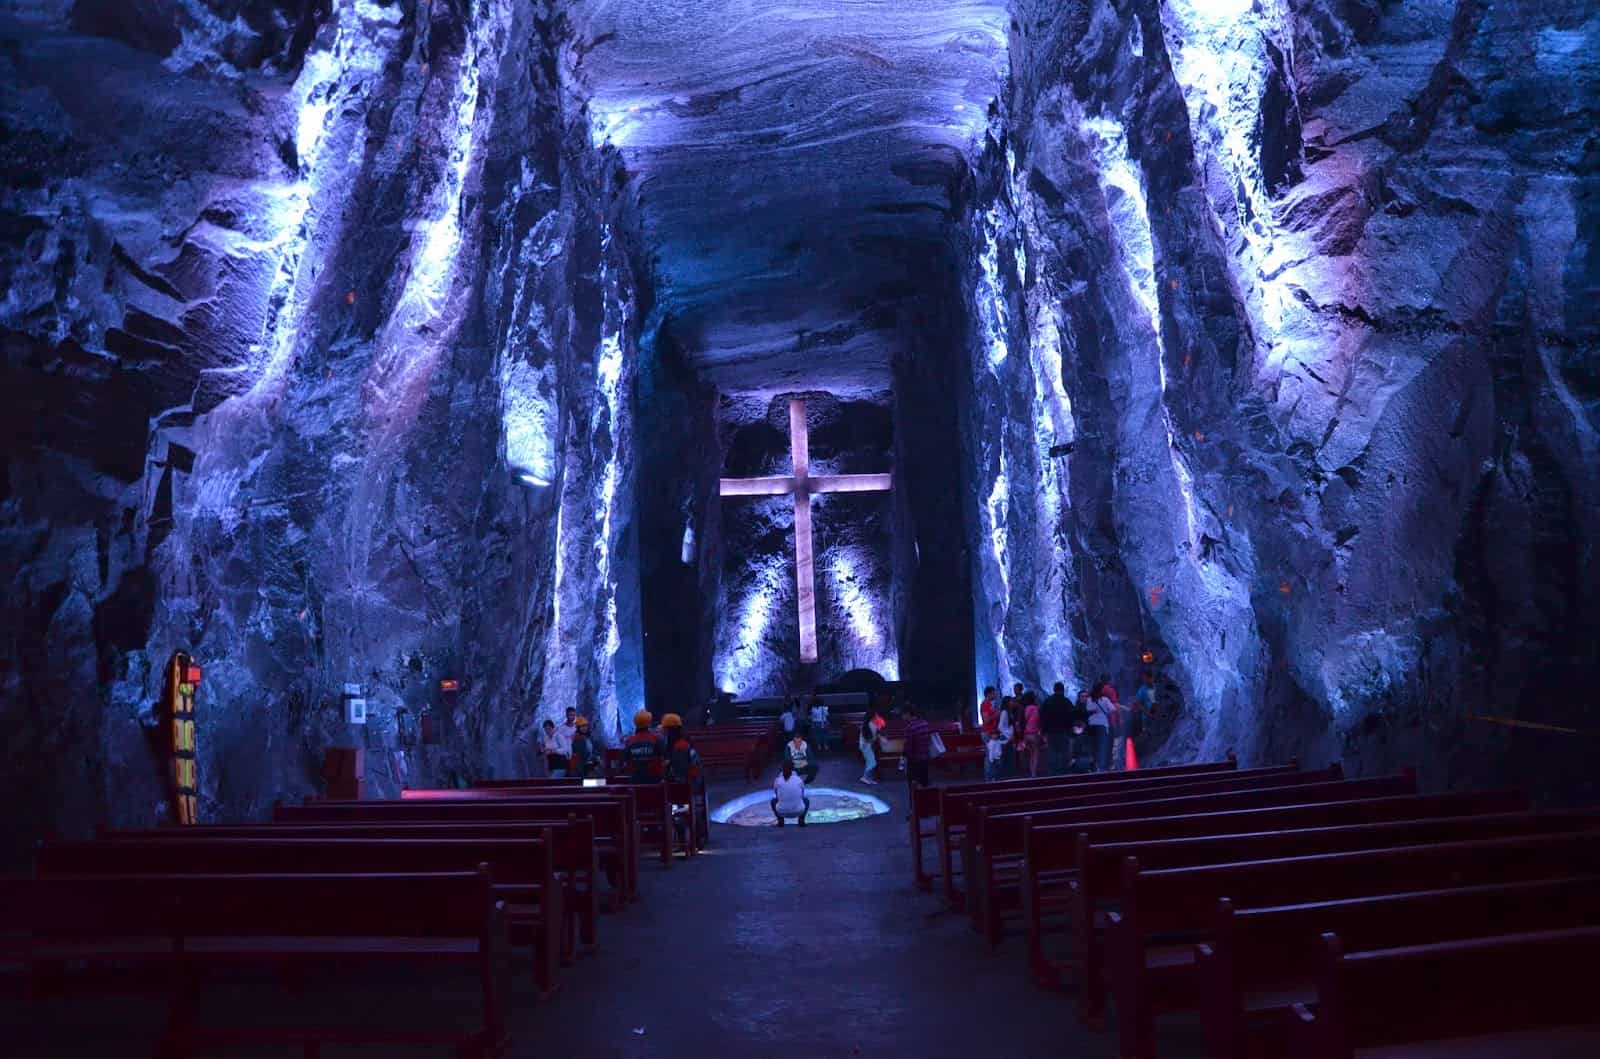 Salt Cathedral in Zipaquirá, Cundinamarca, Colombia